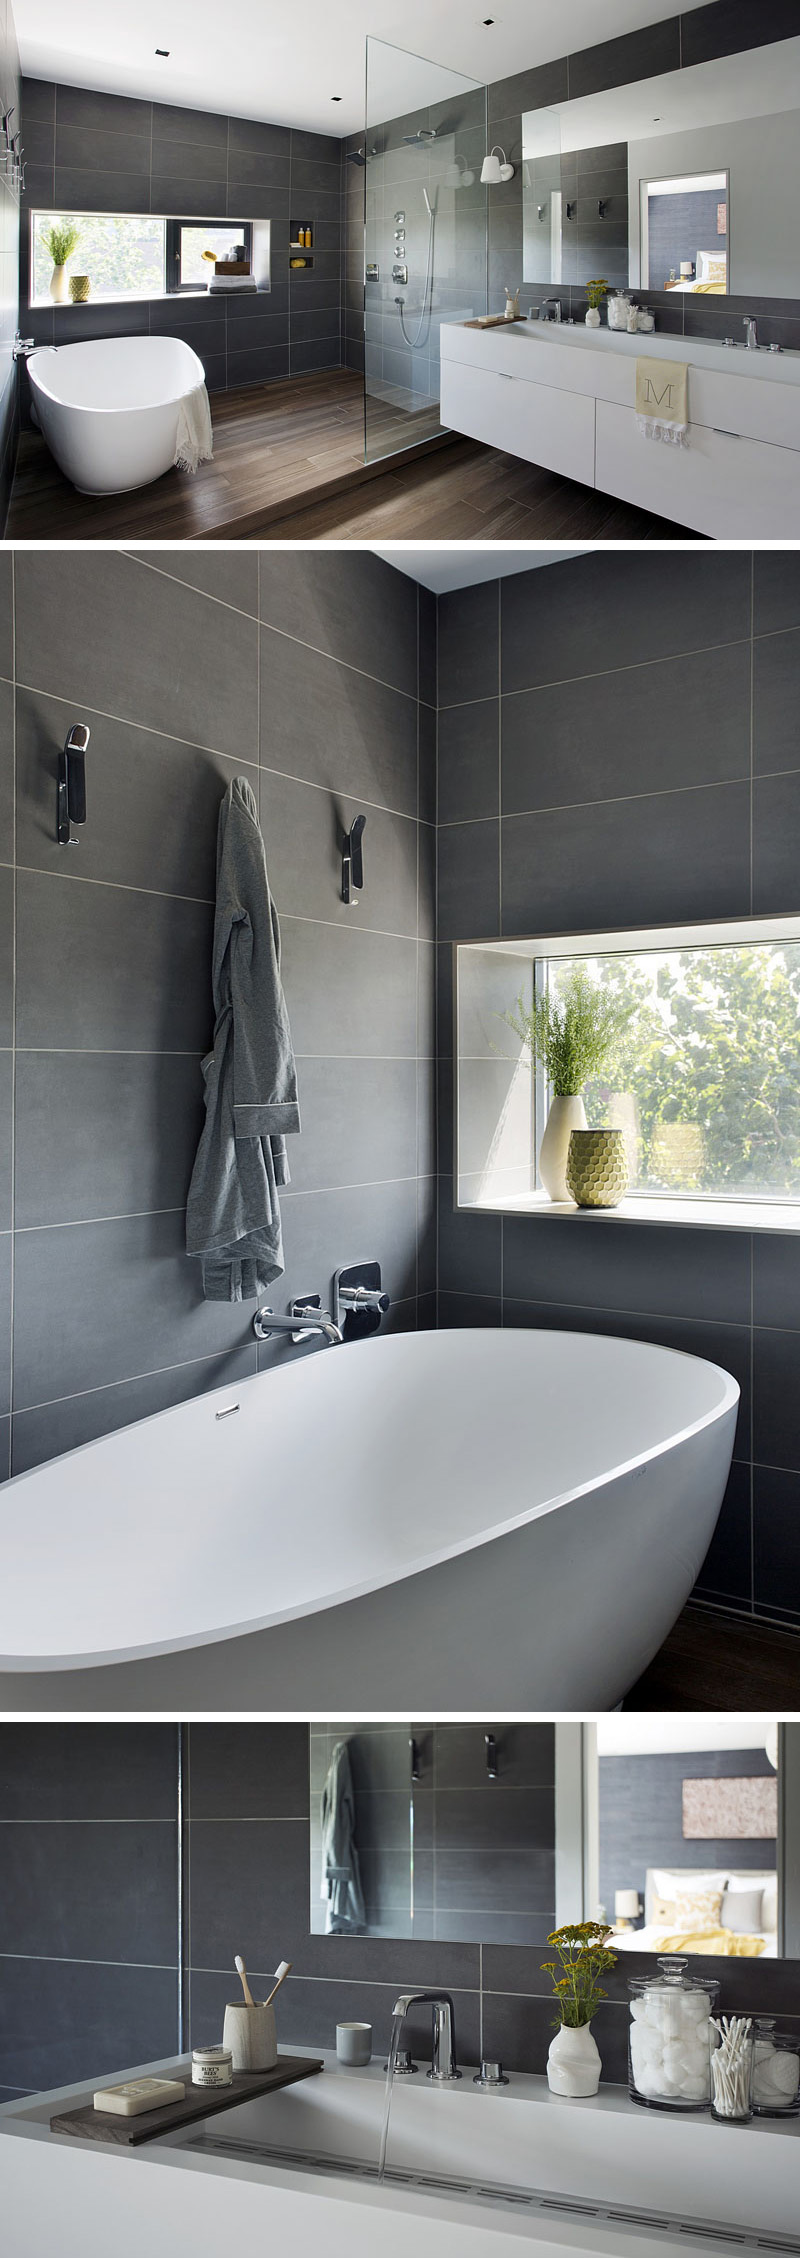 Large, dark grey rectangular tiles and wood flooring give this master bathroom a sophisticated look. The stand alone tub and shower area are slightly elevated above the rest of the room, with a glass partition separating the shower from the white vanity.